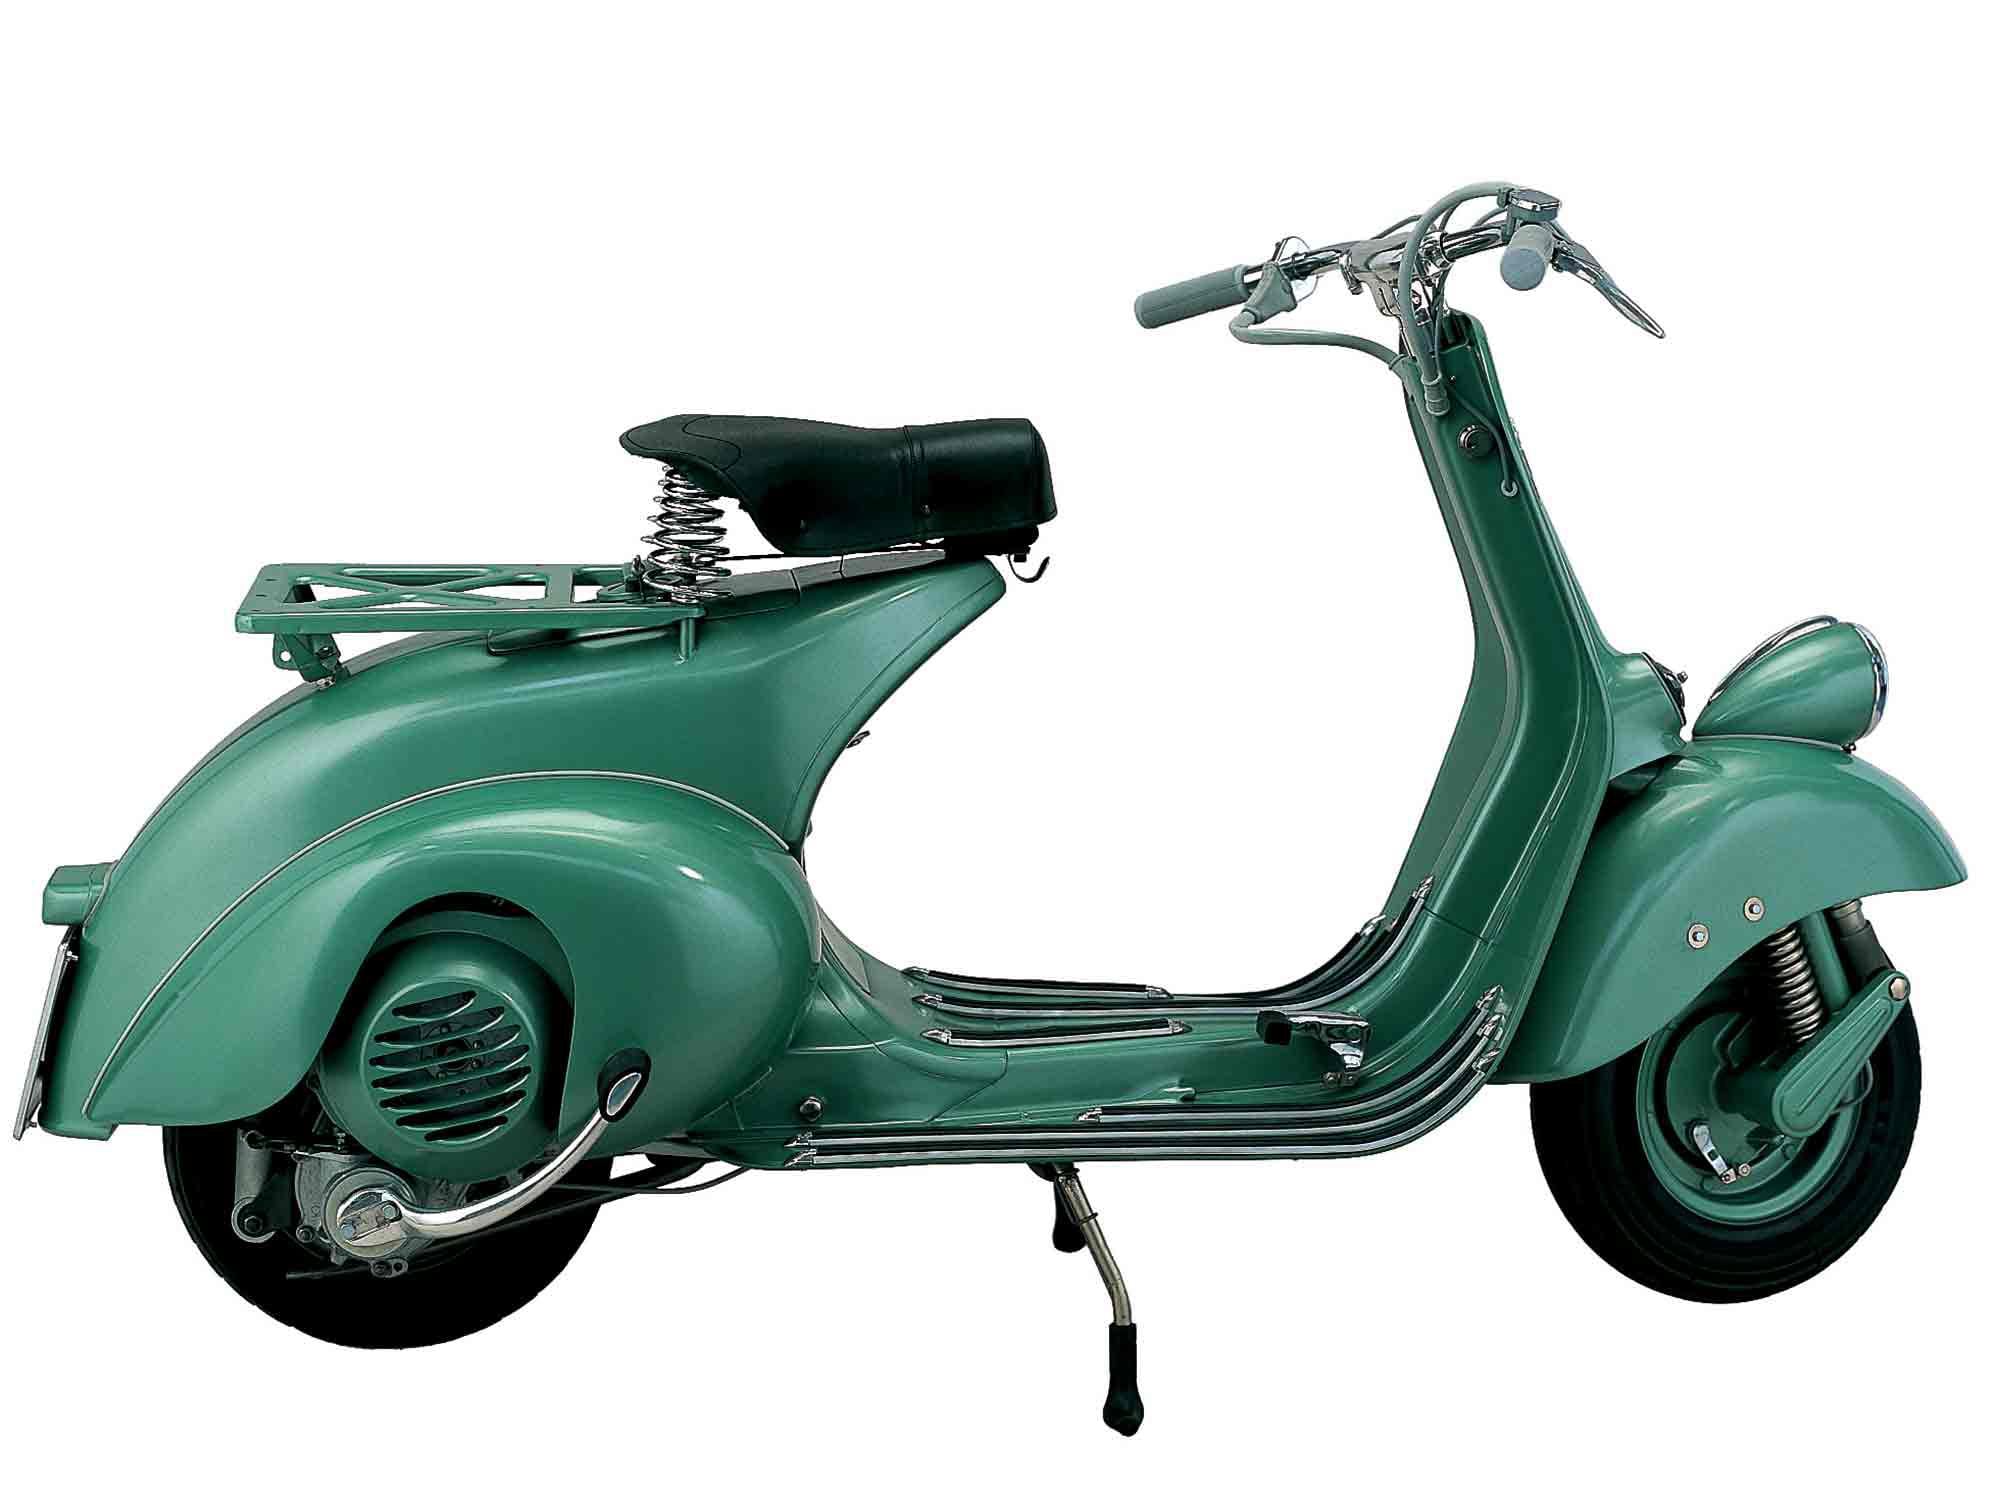 Convert your vintage Vespa, like a 1951 Vespa 125, into a battery-powered machine with a conversion kit from Retrospective Scooters.